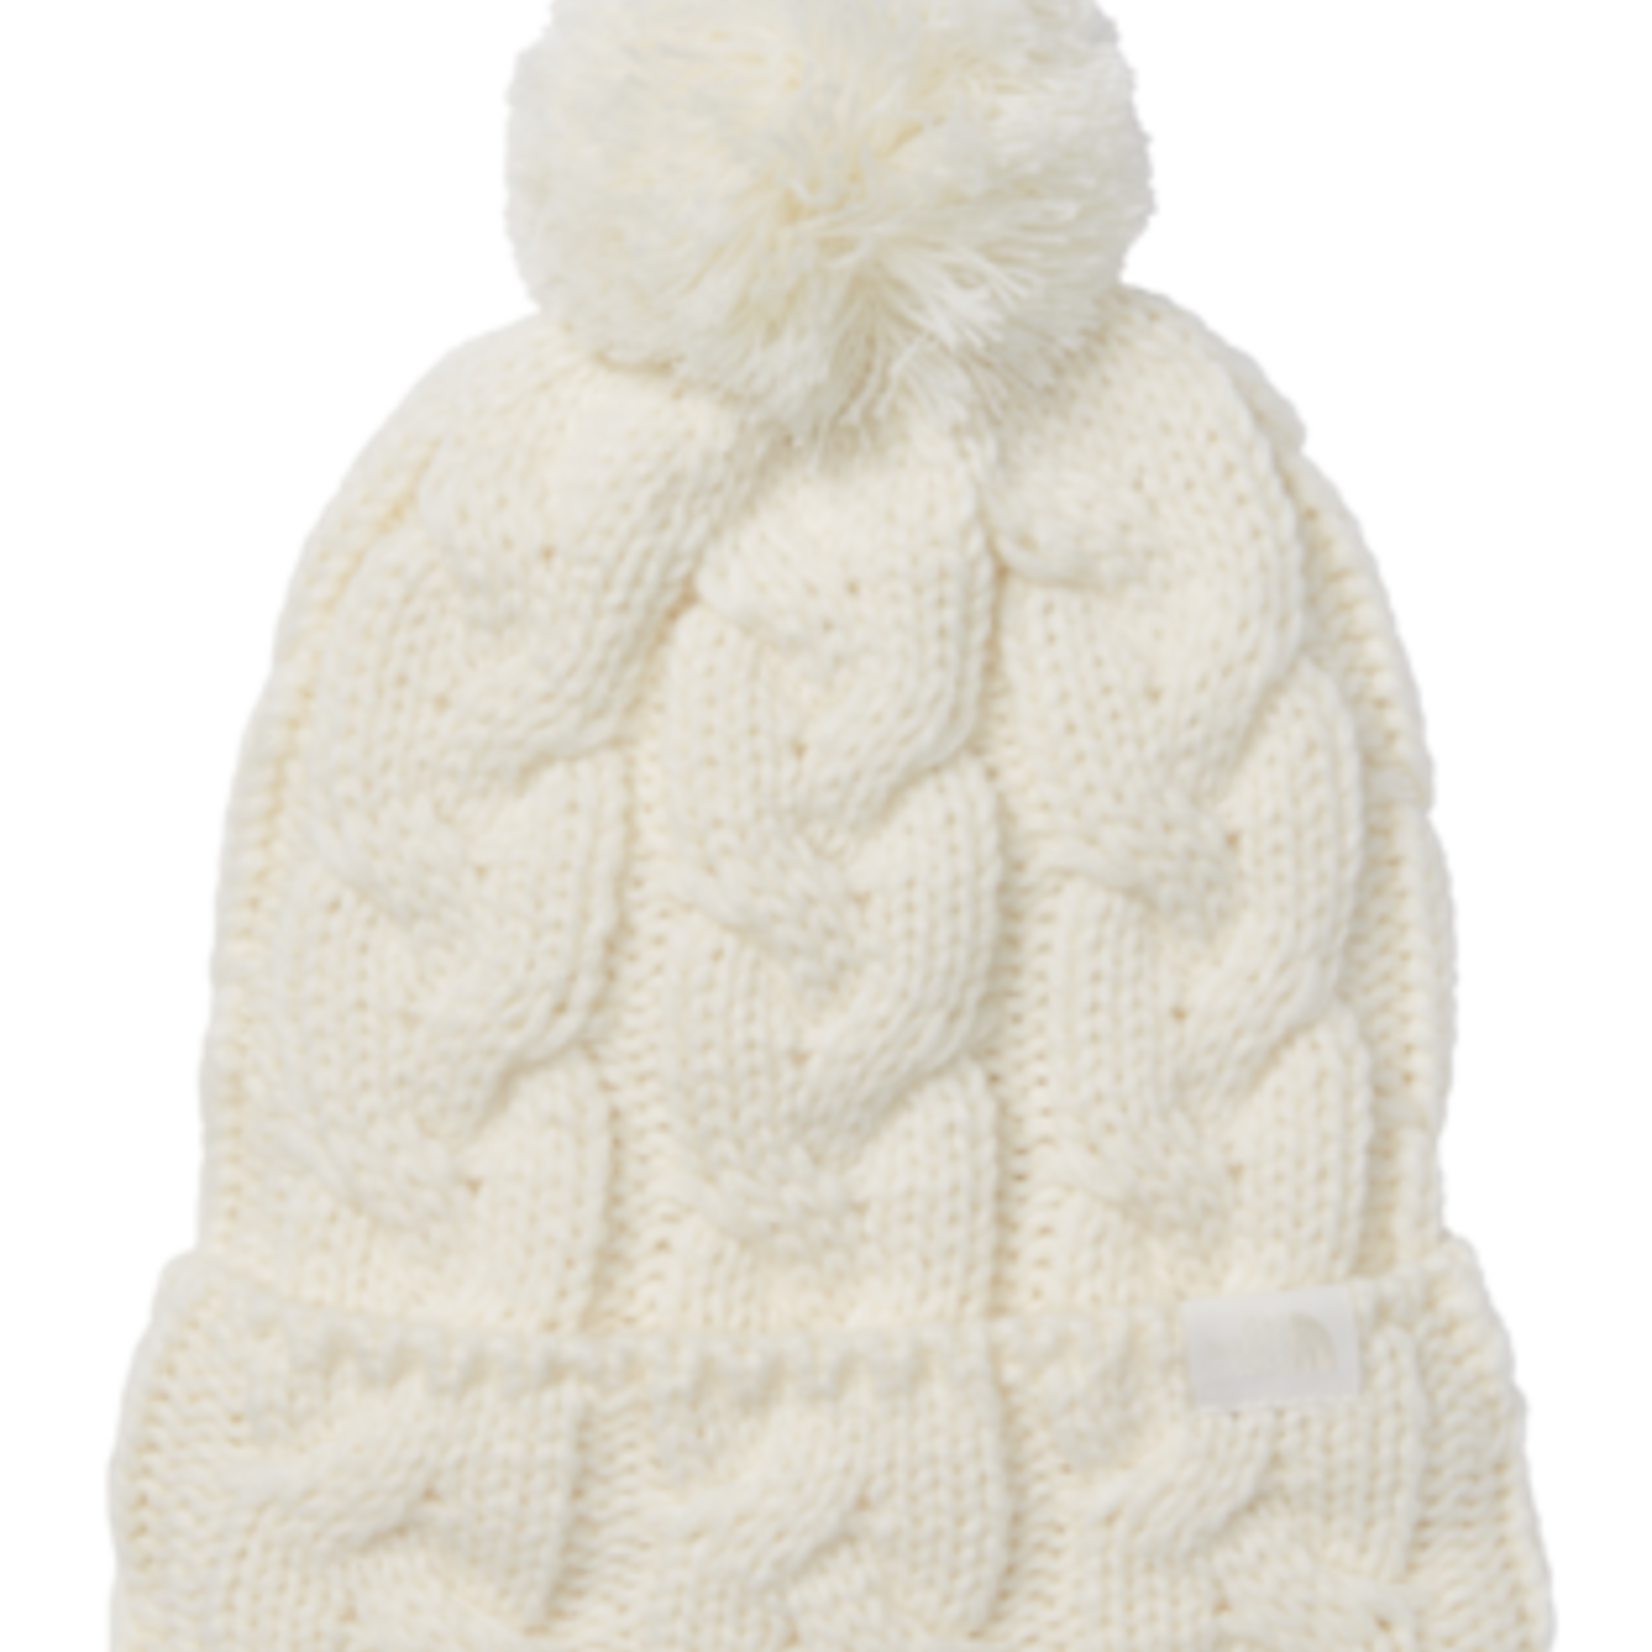 The North Face The North Face Toque, Cable Minna Pom Beanie, Ladies, OS